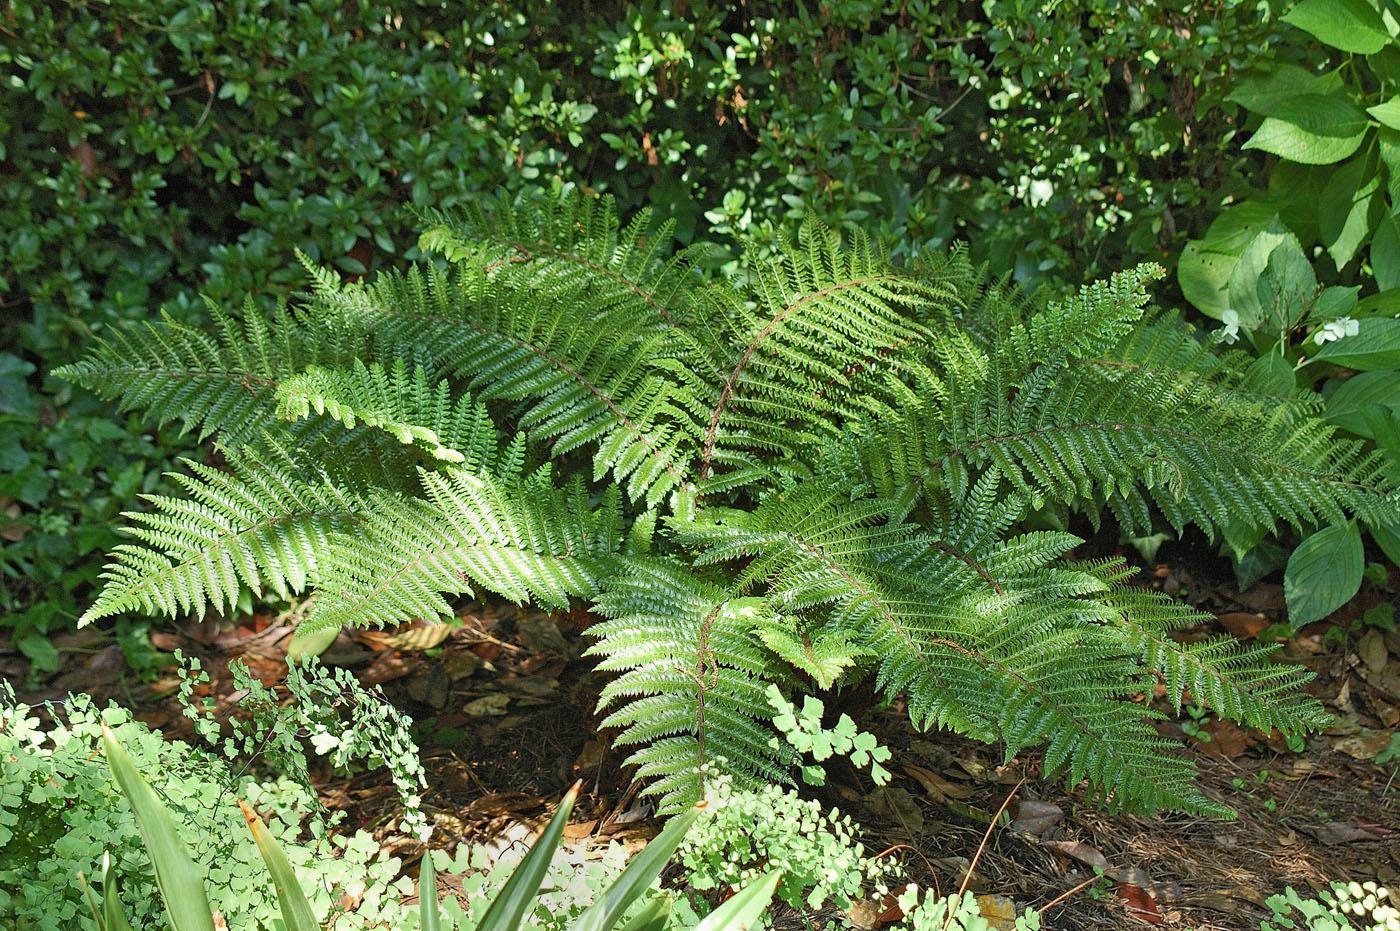 The Japanese tassel fern gets its name from the way young fronds, called crosiers, unfurl and bend backward, drooping in a tassel form before flattening out. The evergreen fronds are a shiny, deep, dark green that gives an almost waxy appearance. (Photo by Norman Winter)